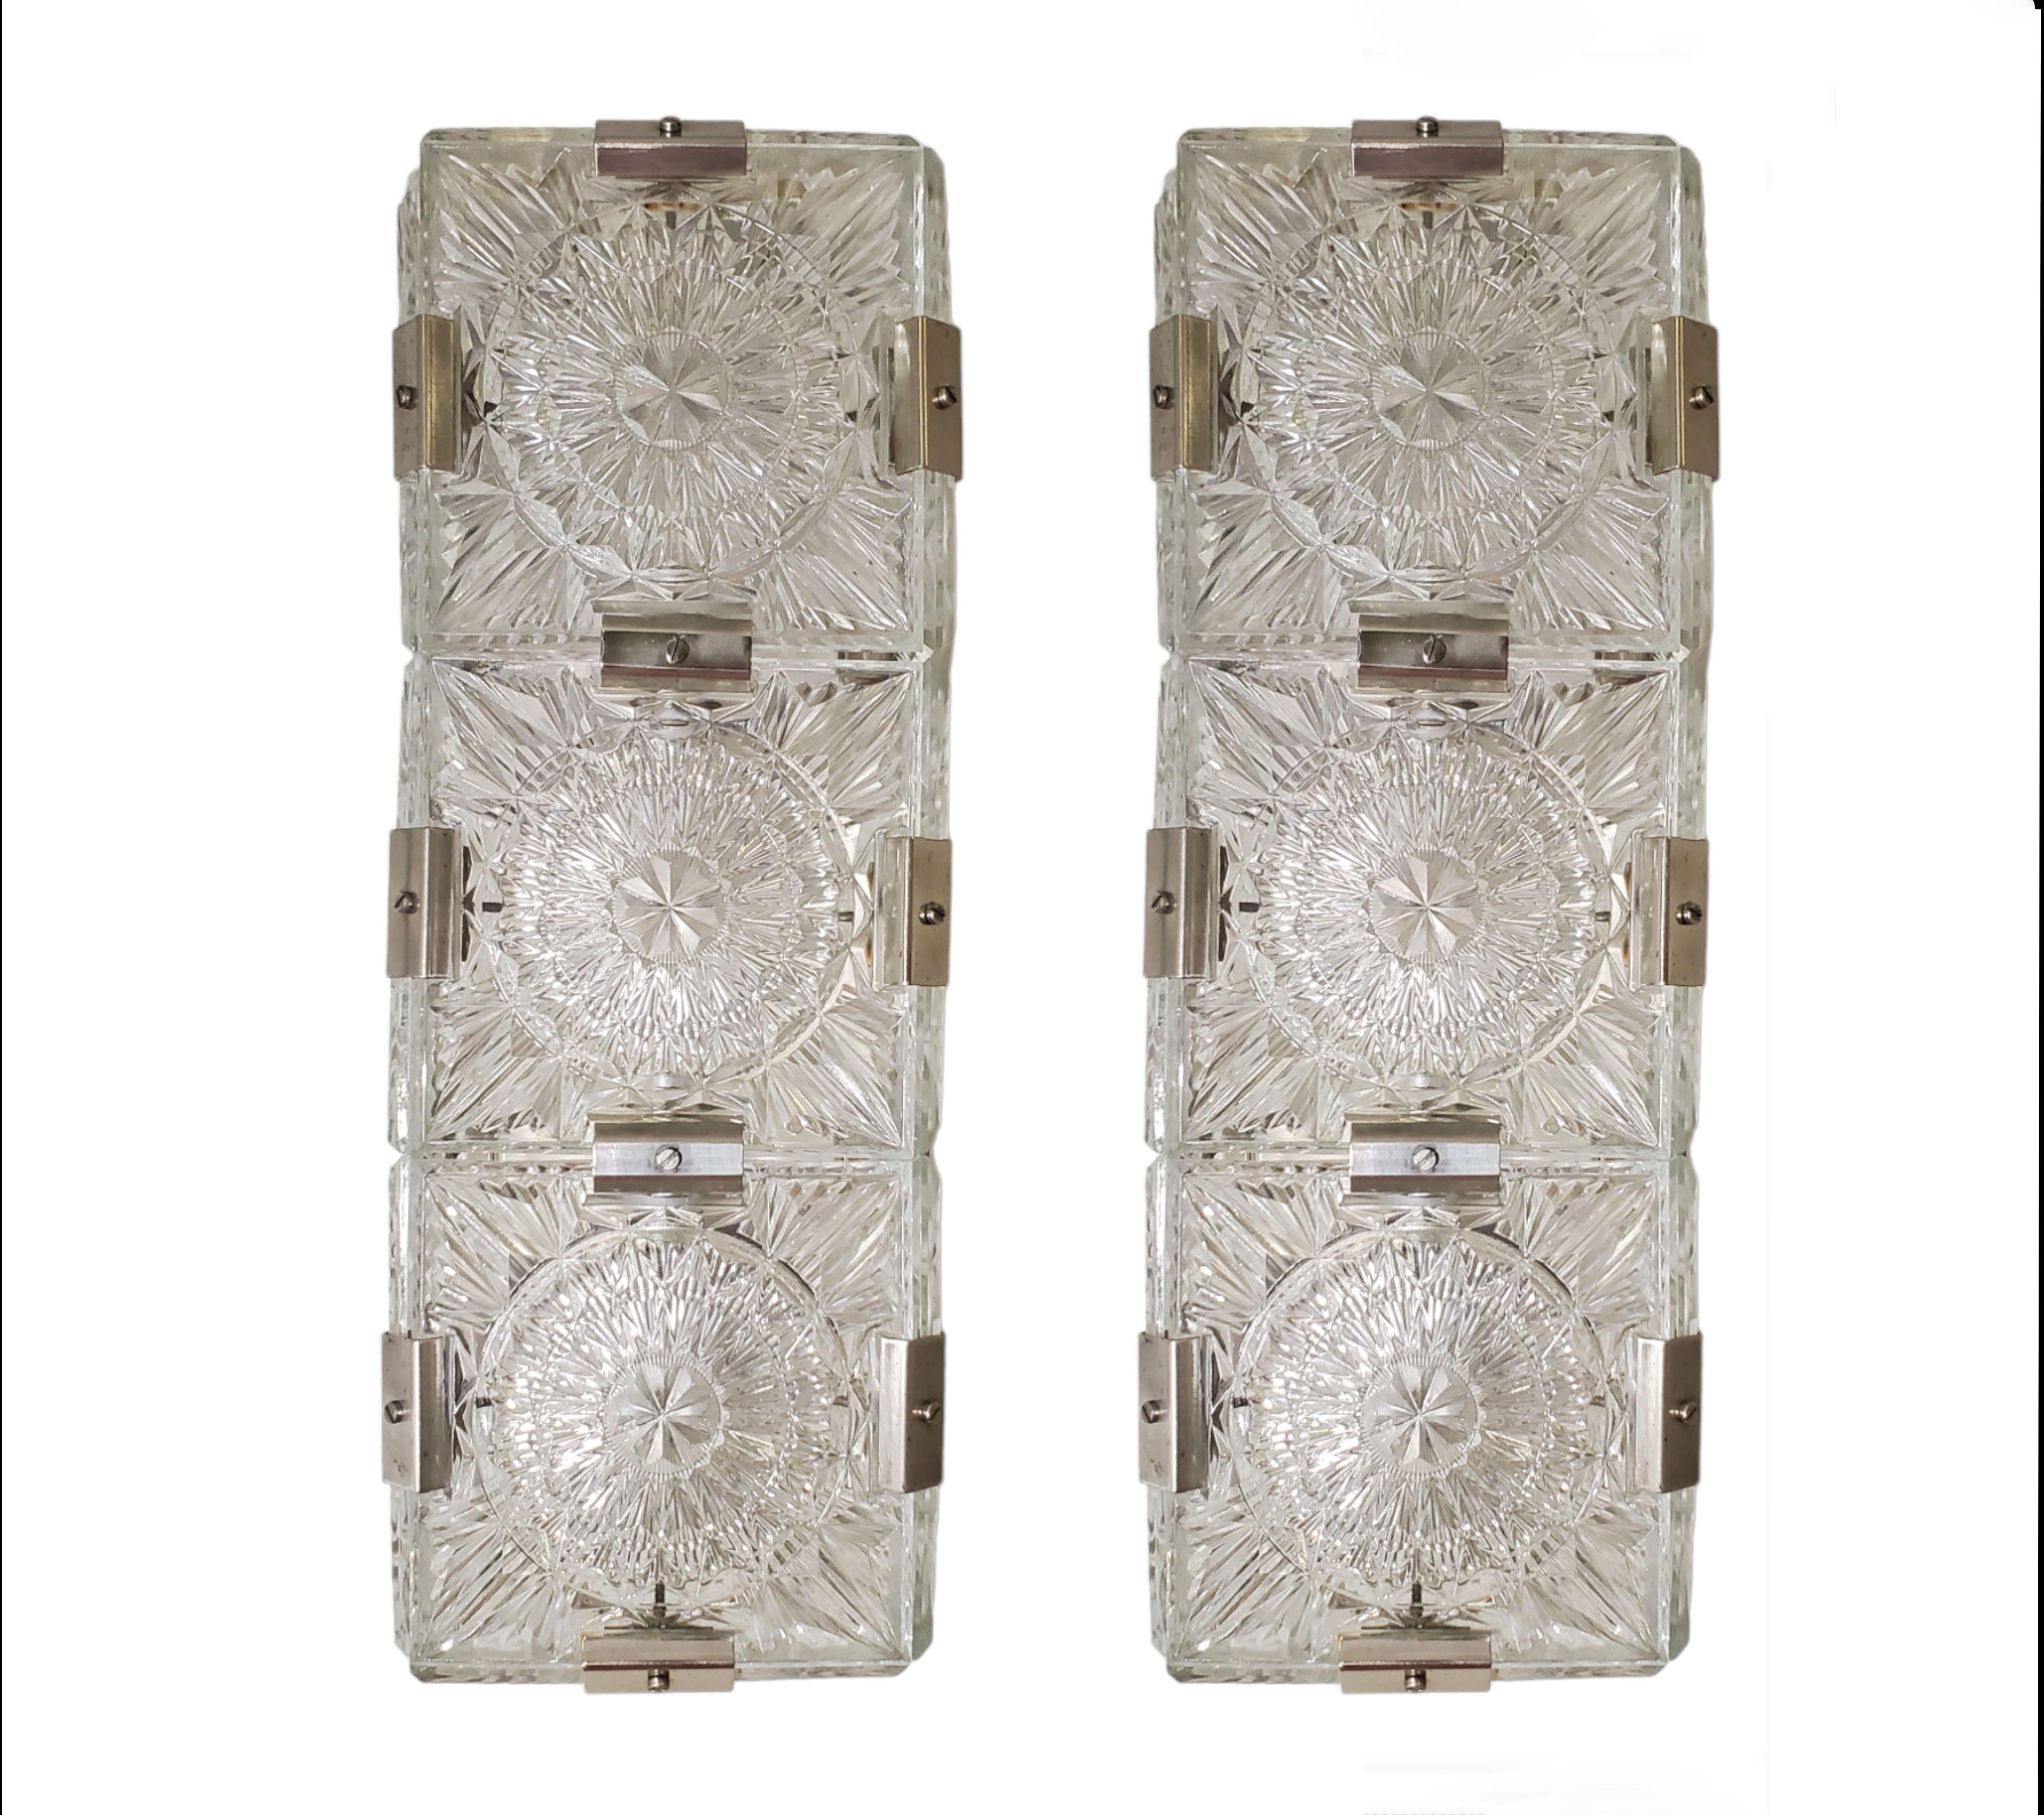 A pair of Mid-Century Modern rectangular shaped sconces.
Patterns of geometric and stylized floral motif decorate this lovely architectural sconce in a gridwork of square glass panels structurally and decoratively supported by original nickeled